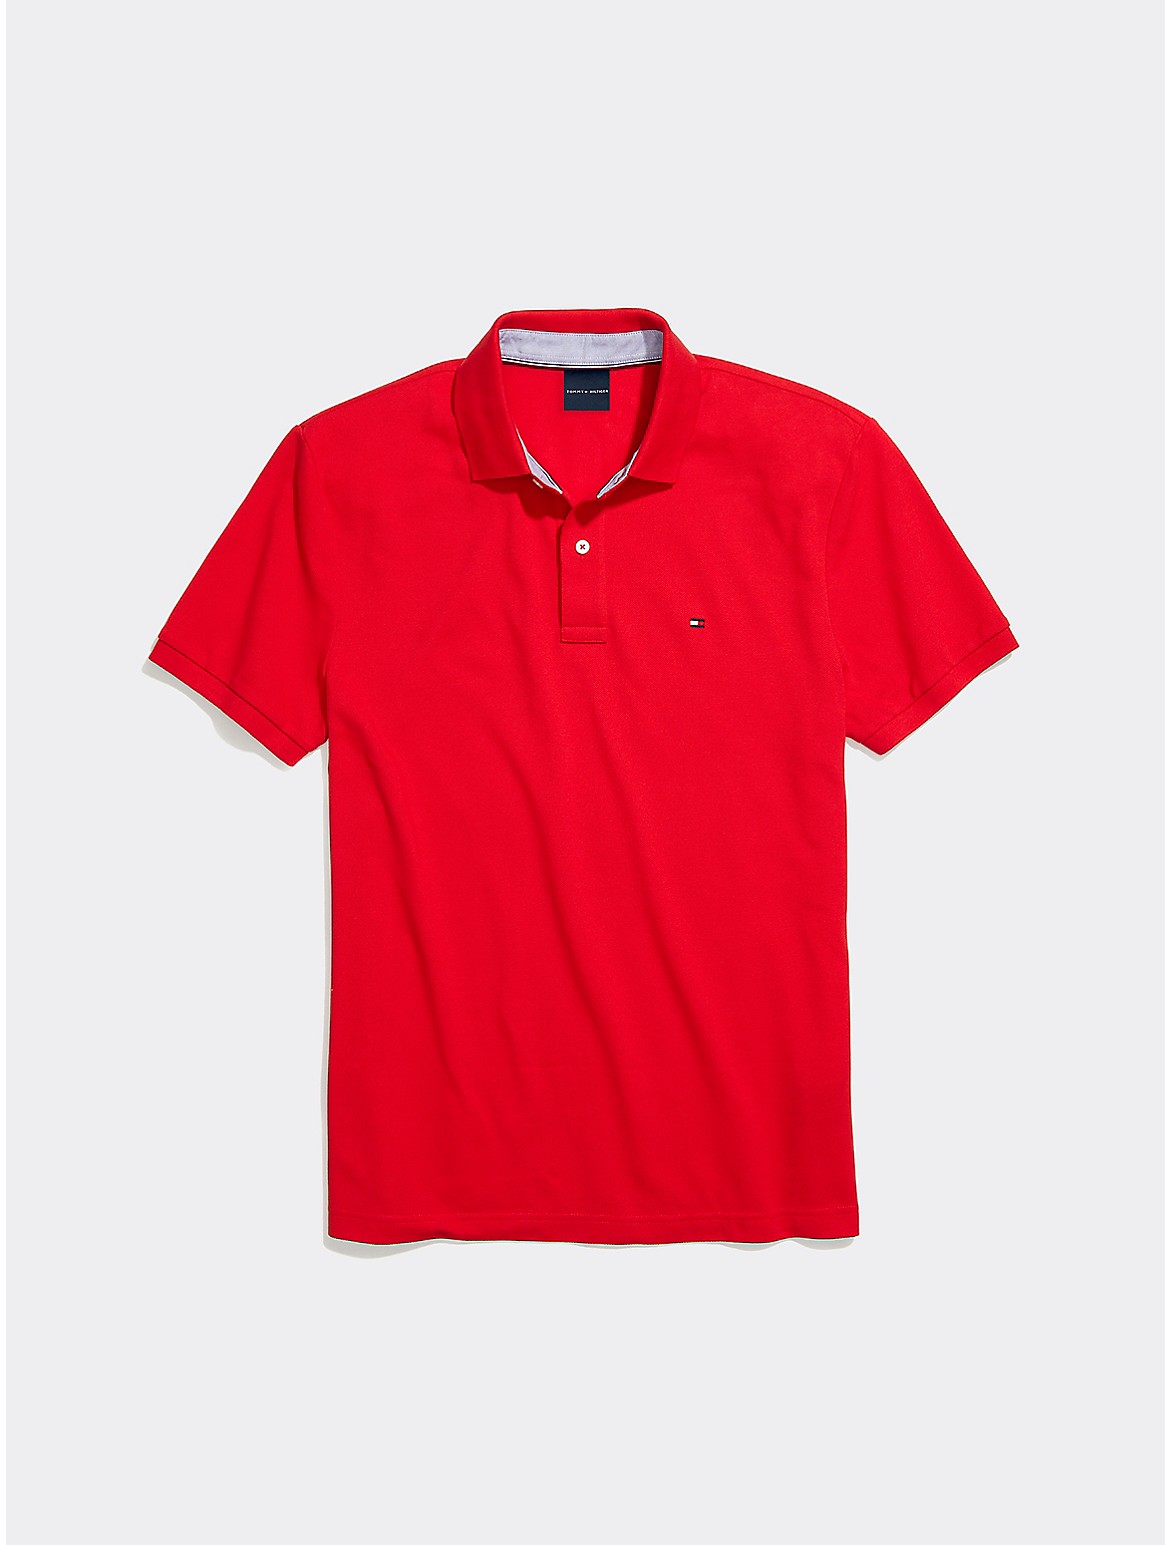 Tommy Hilfiger Men's Custom Fit Polo - Red - XXL